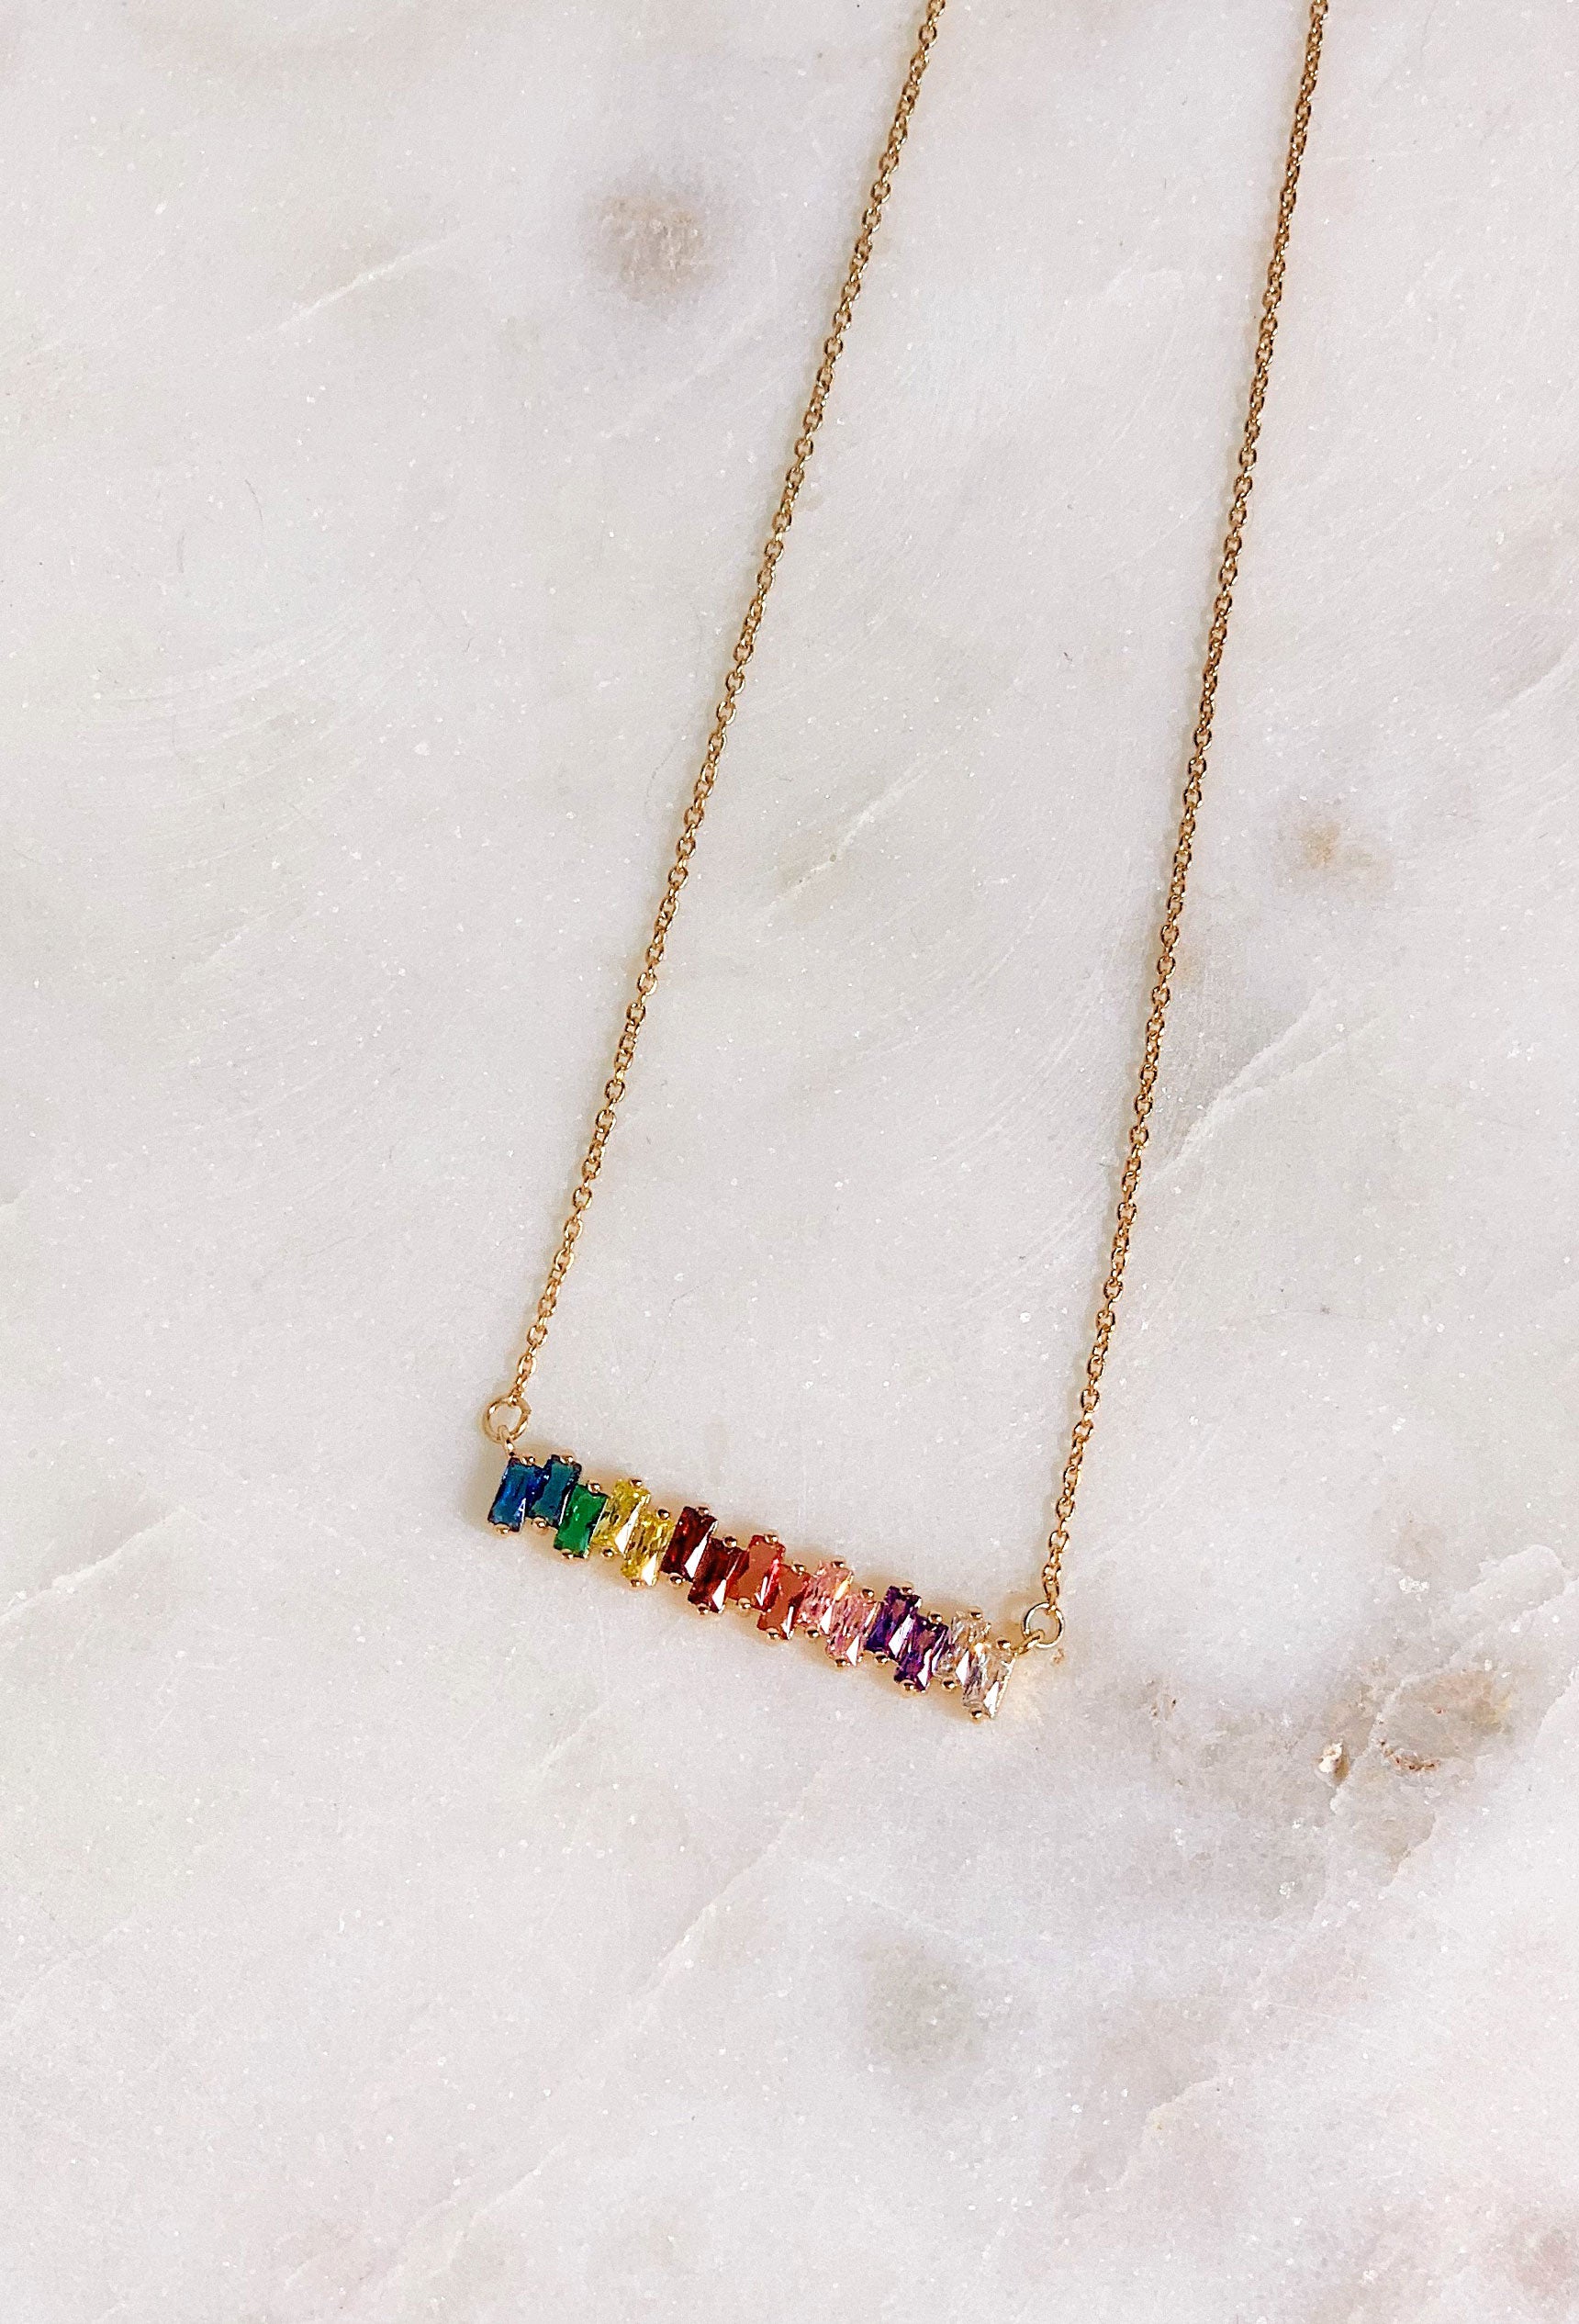 Hazel Rainbow Crystal Bar Necklace, 15 colored rainbow stones alined in a bar necklace on gold chain 